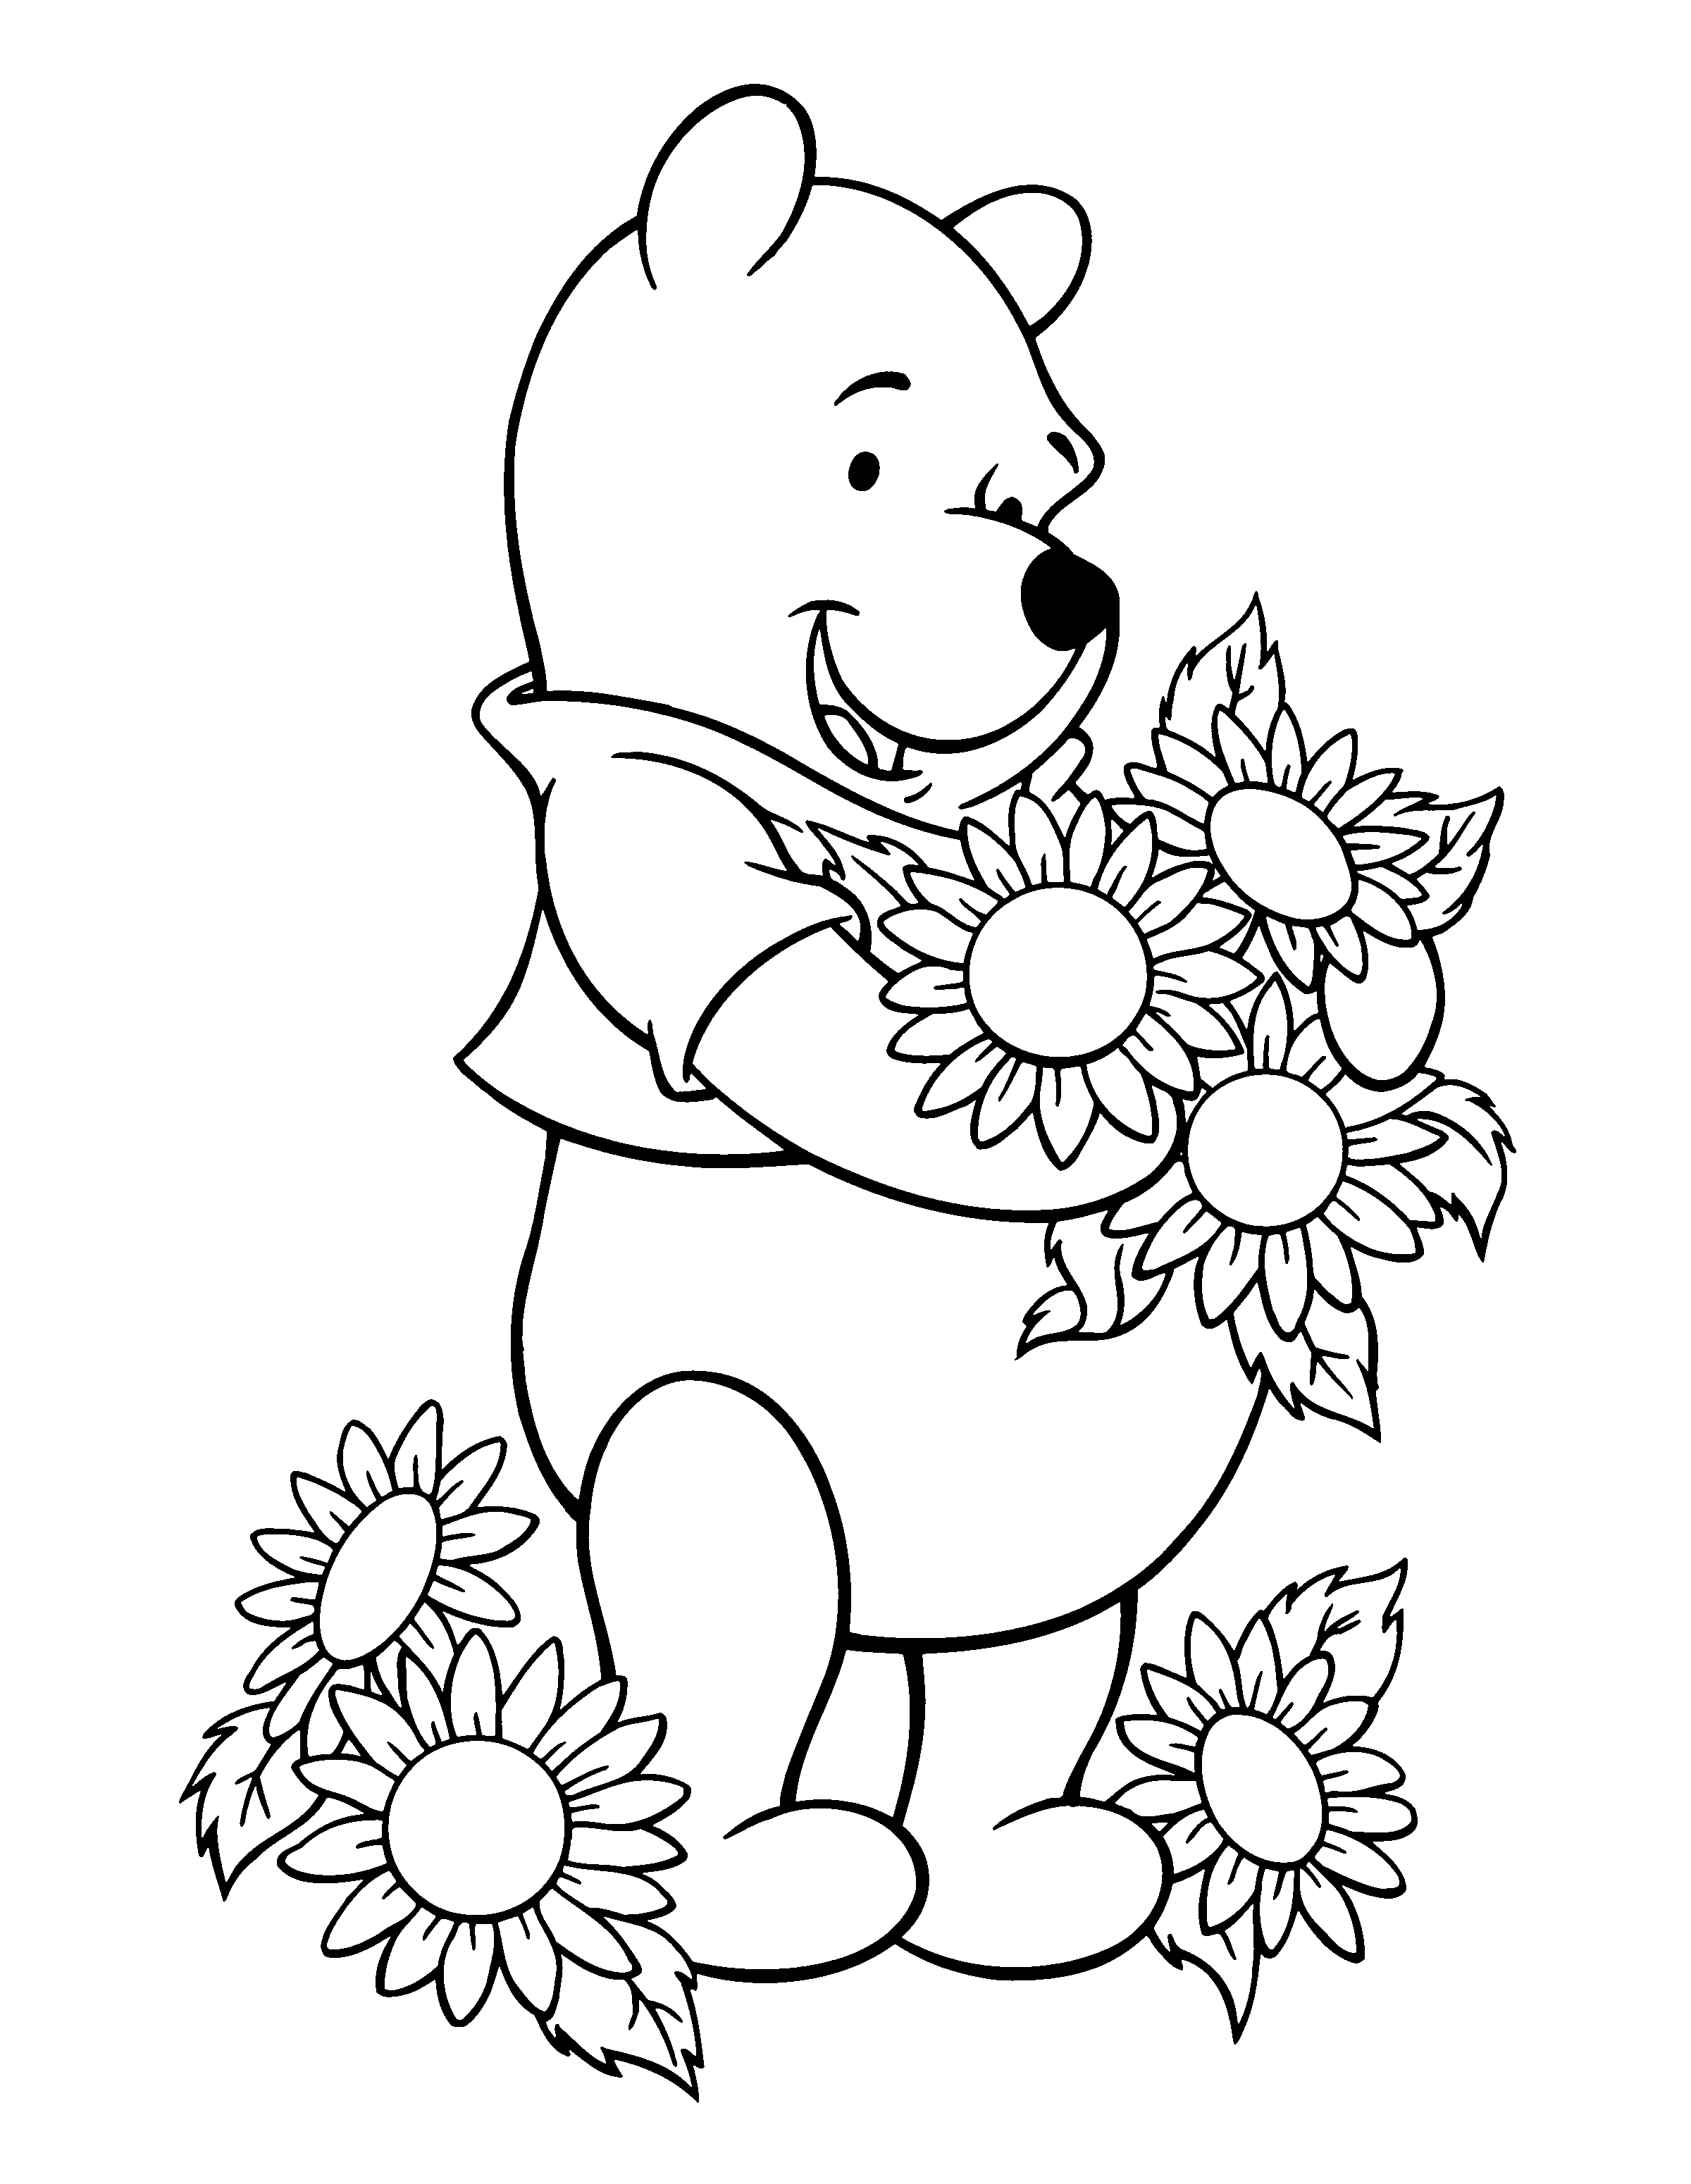 Pooh Loves Sunflowers Coloring Page